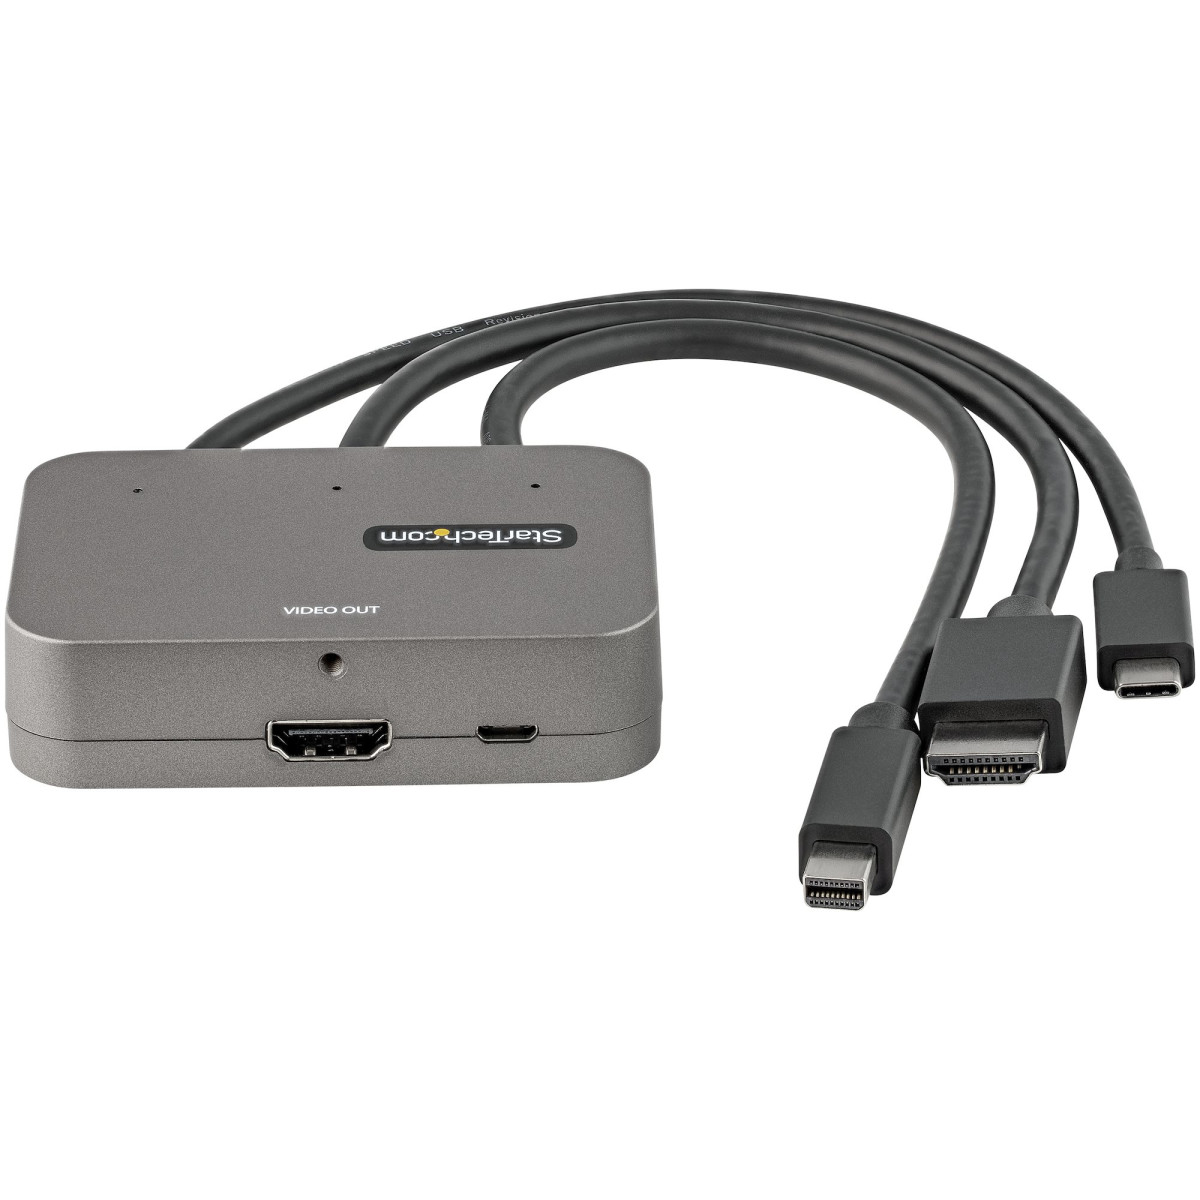 USB-C/HDMI/mDP Multiport to HDMIAdapter